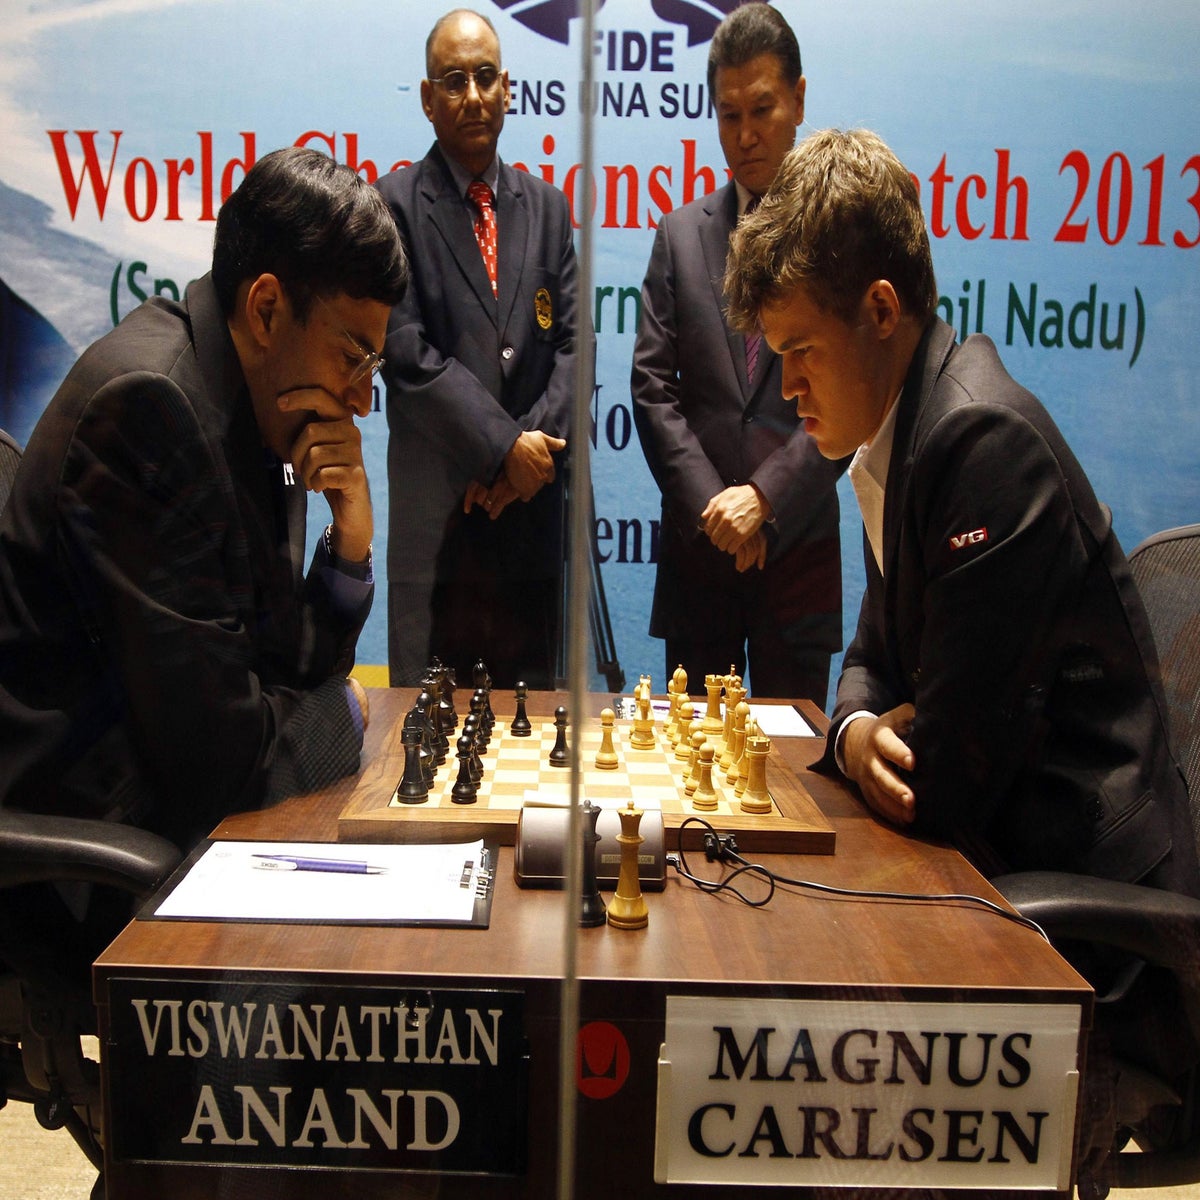 Viswanathan Anand vs Magnus Carlsen: Chess stages biggest game since  Fischer vs Spassky, The Independent